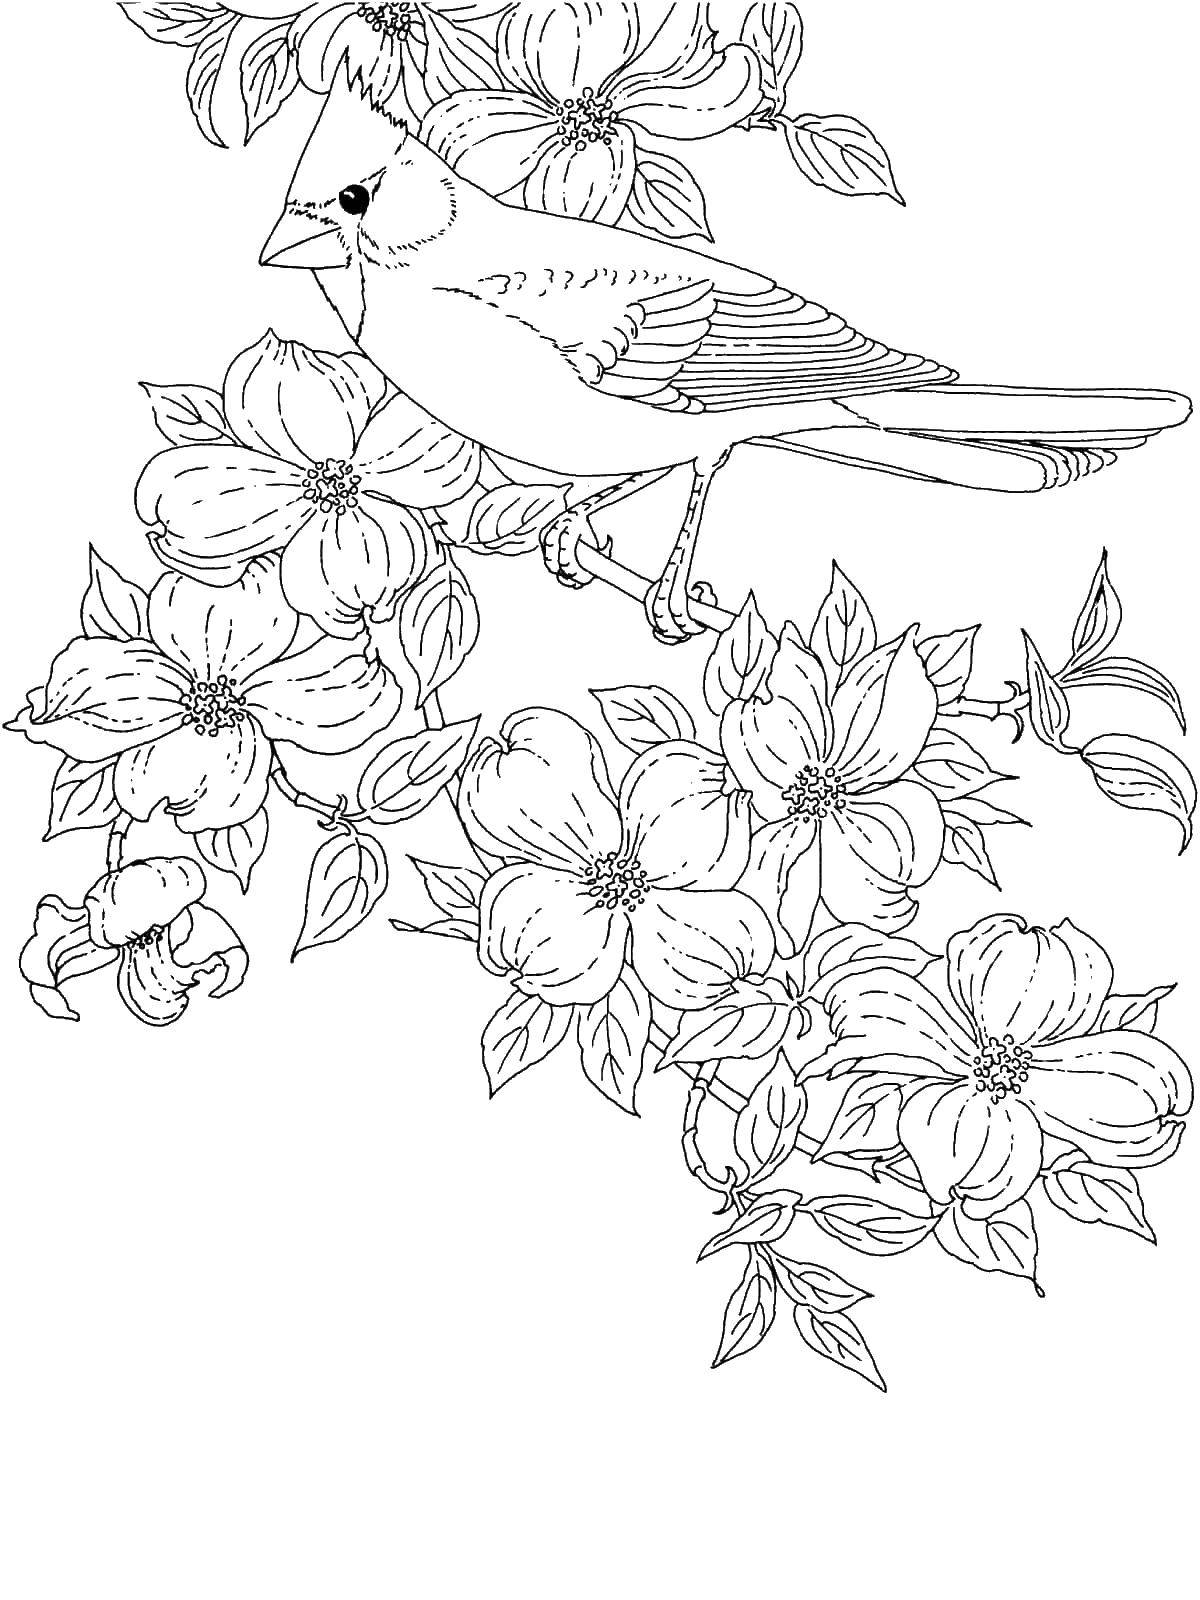 Coloring Bird and flowers. Category flowers. Tags:  flowers, birds, plants.